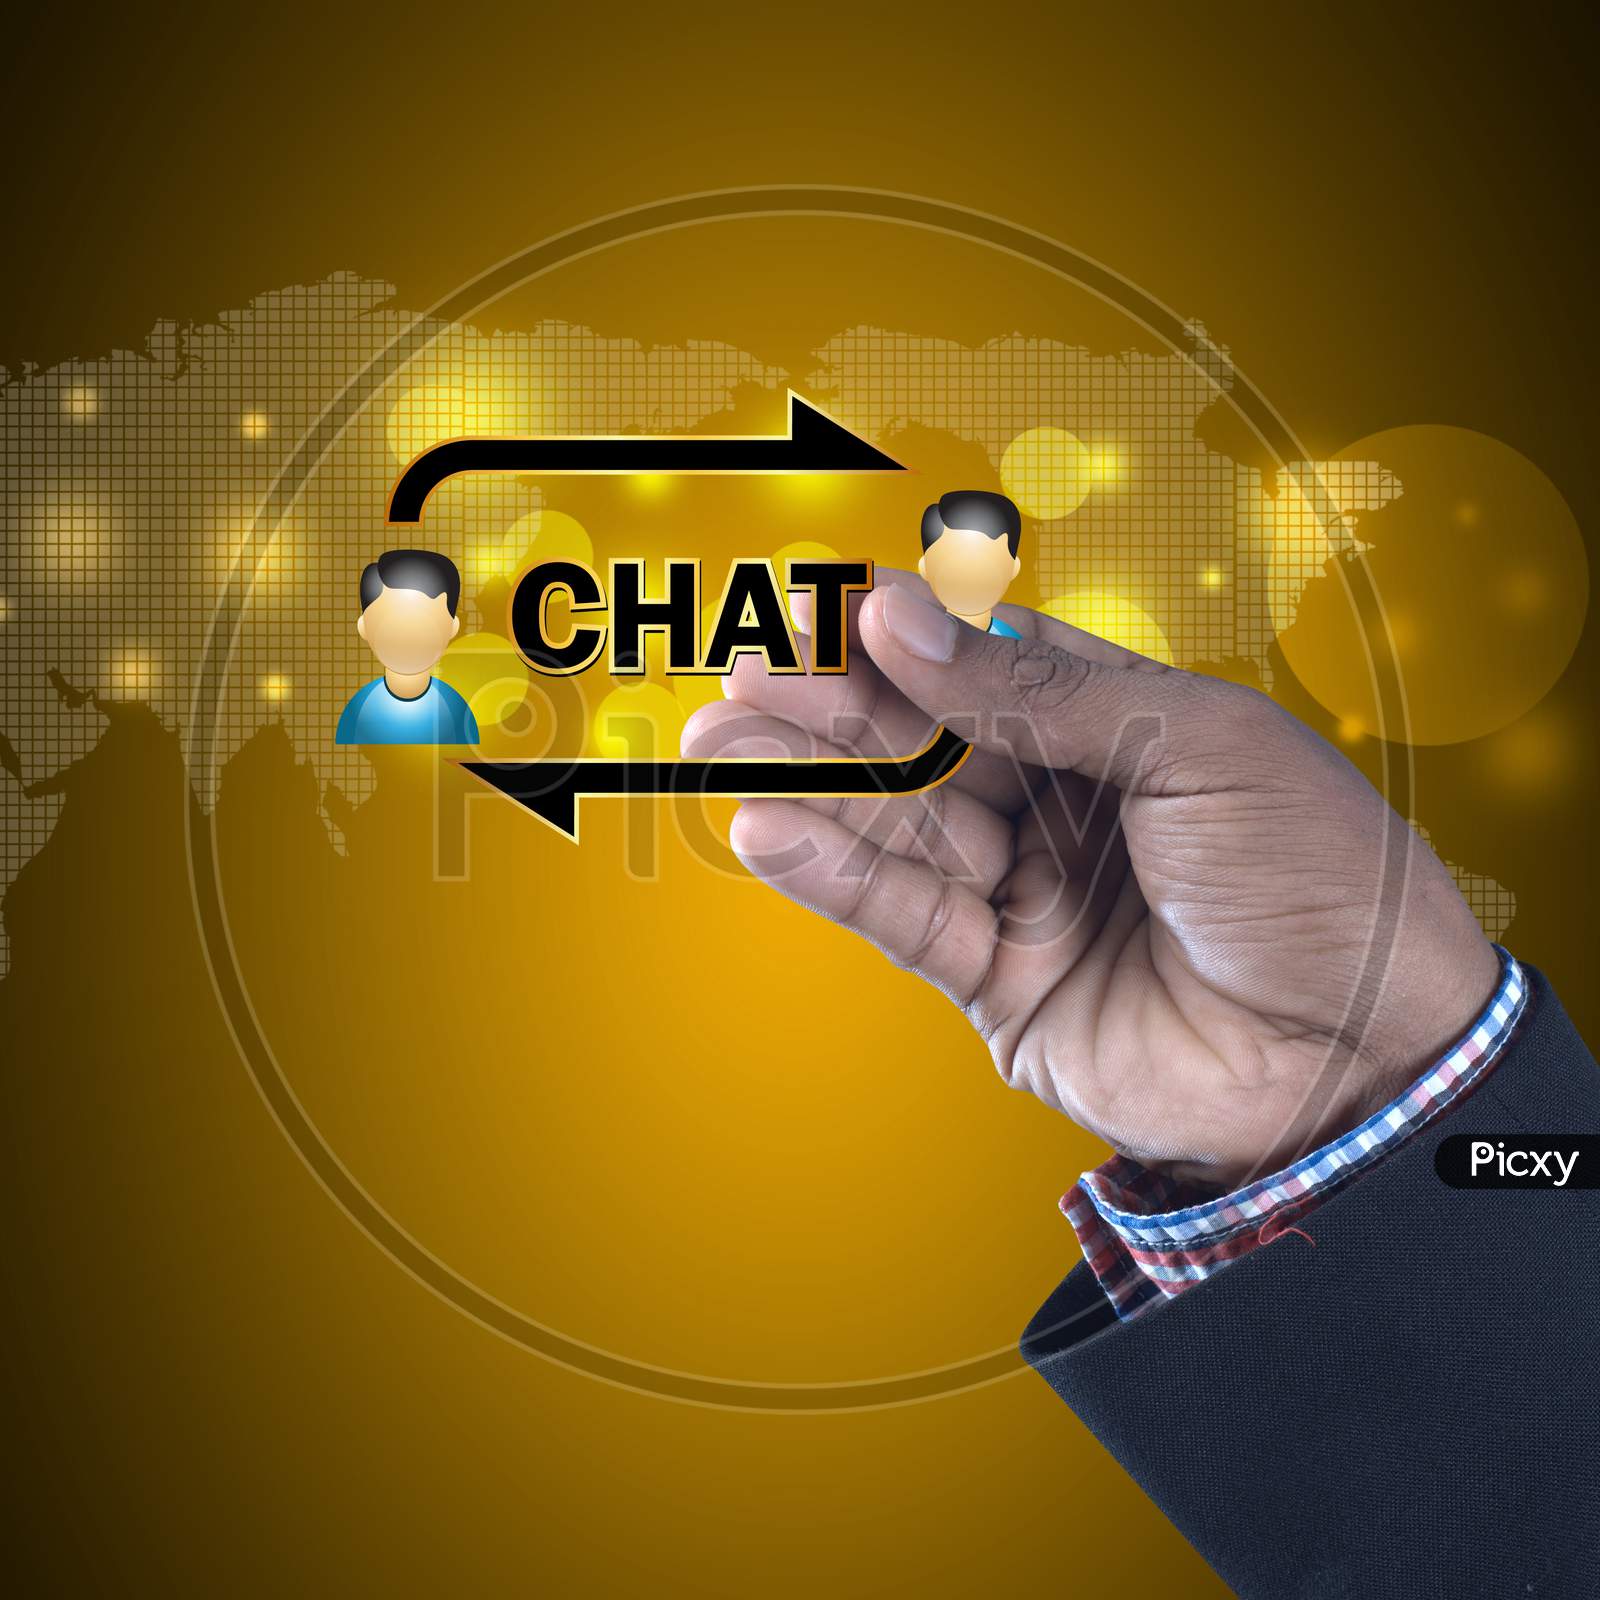 Close up shot of Person's Hand holding a Chat or Conversation Icon